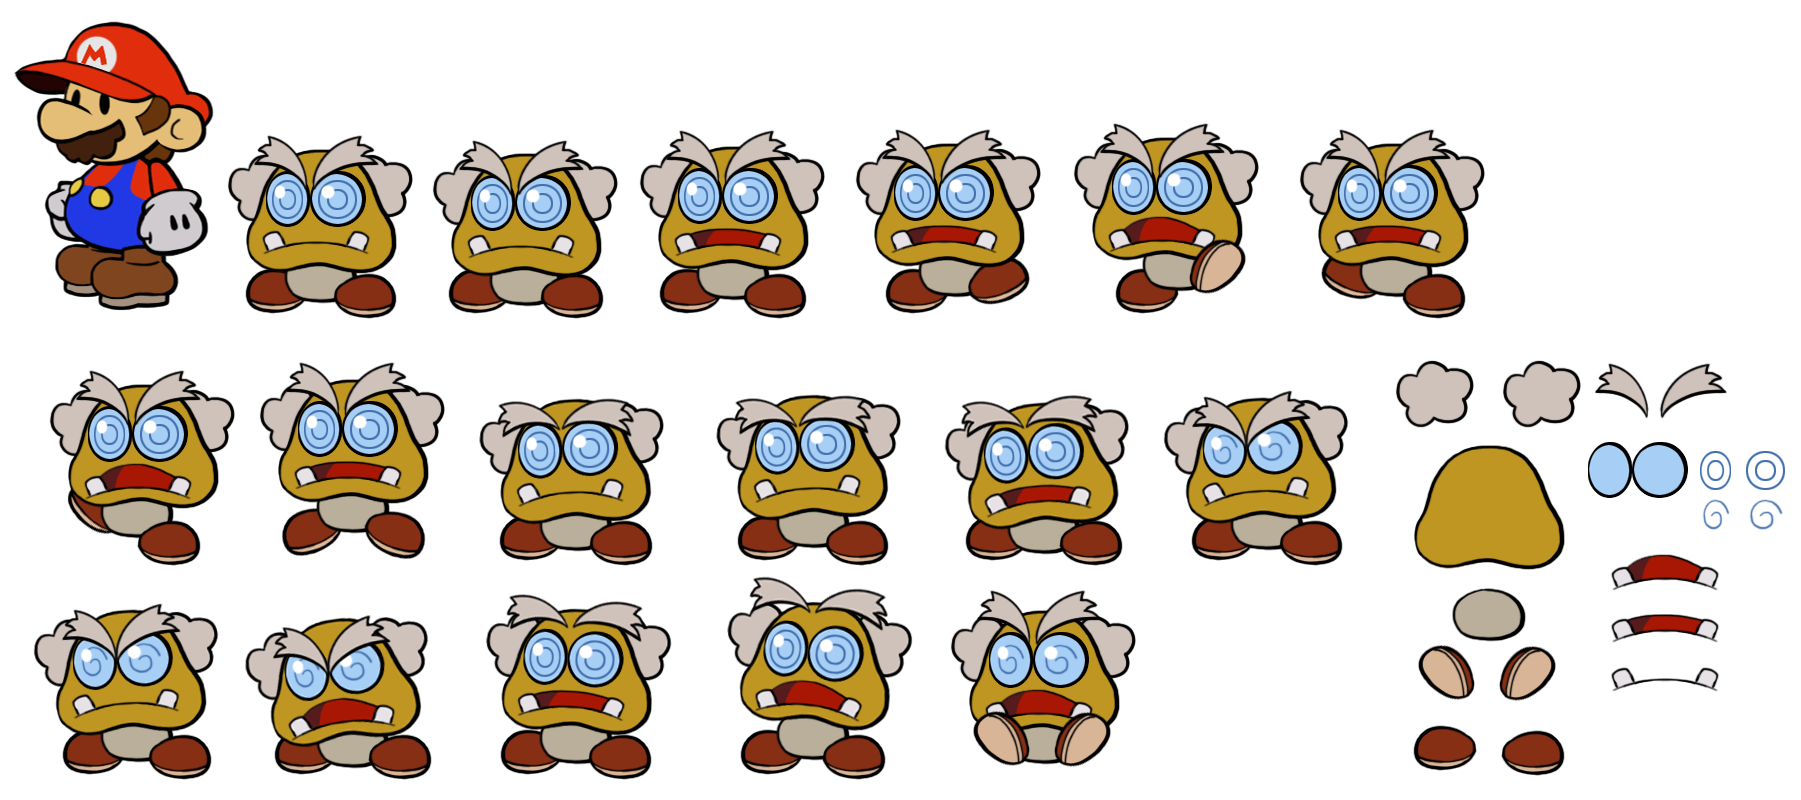 Professor Frankly (Paper Mario-Style)